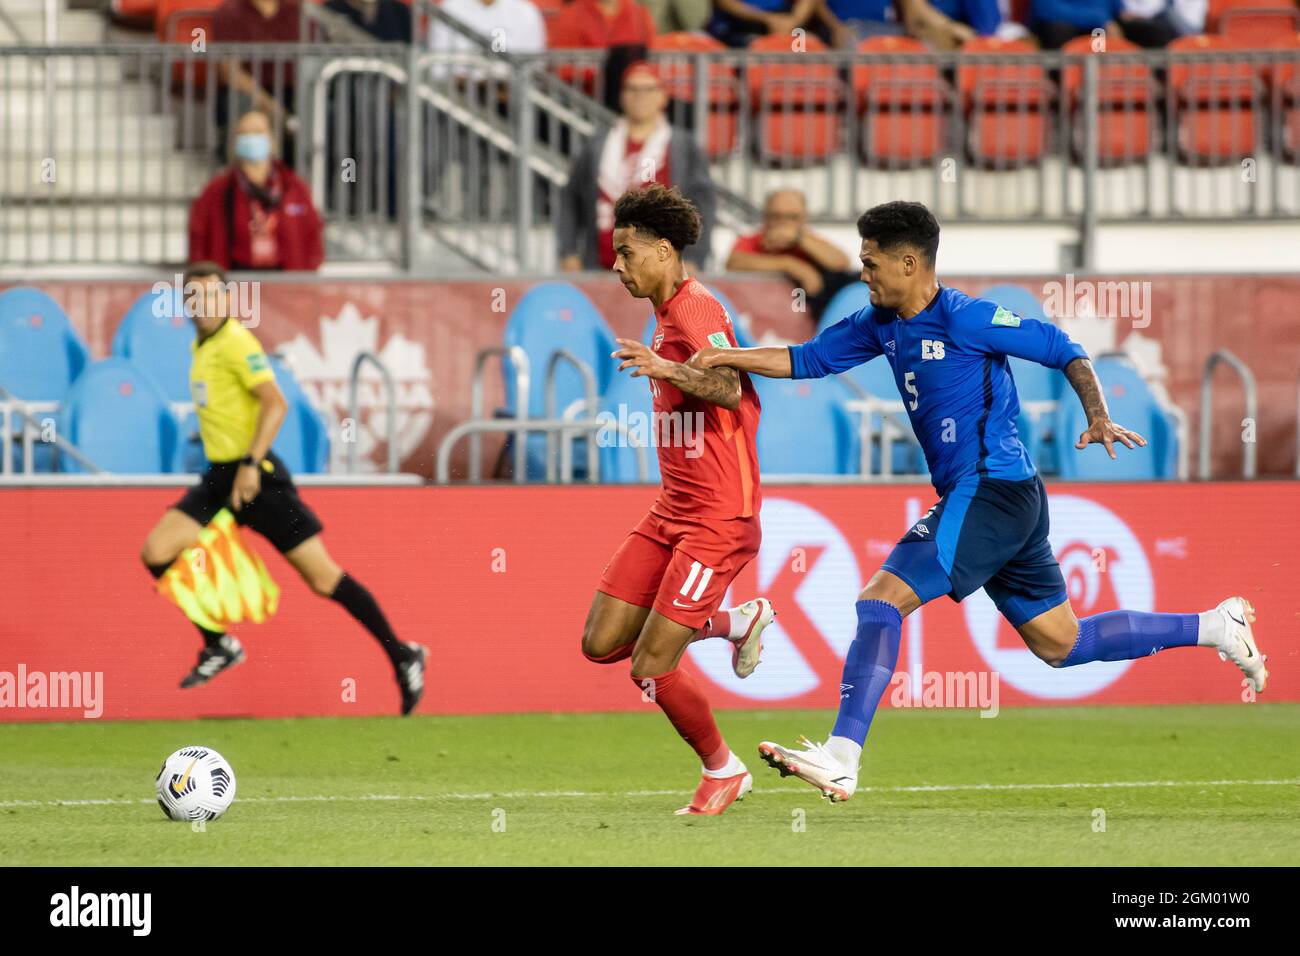 Toronto, Canada, September 8, 2021: Tajon Buchanan (No.11) of Team Canada competes for the ball against Ronald Gómez (No.5) of Team El Salvador during the CONCACAF FIFA World Cup Qualifying 2022 match at BMO Field in Toronto, Canada. Canada won the match 3-0. Stock Photo